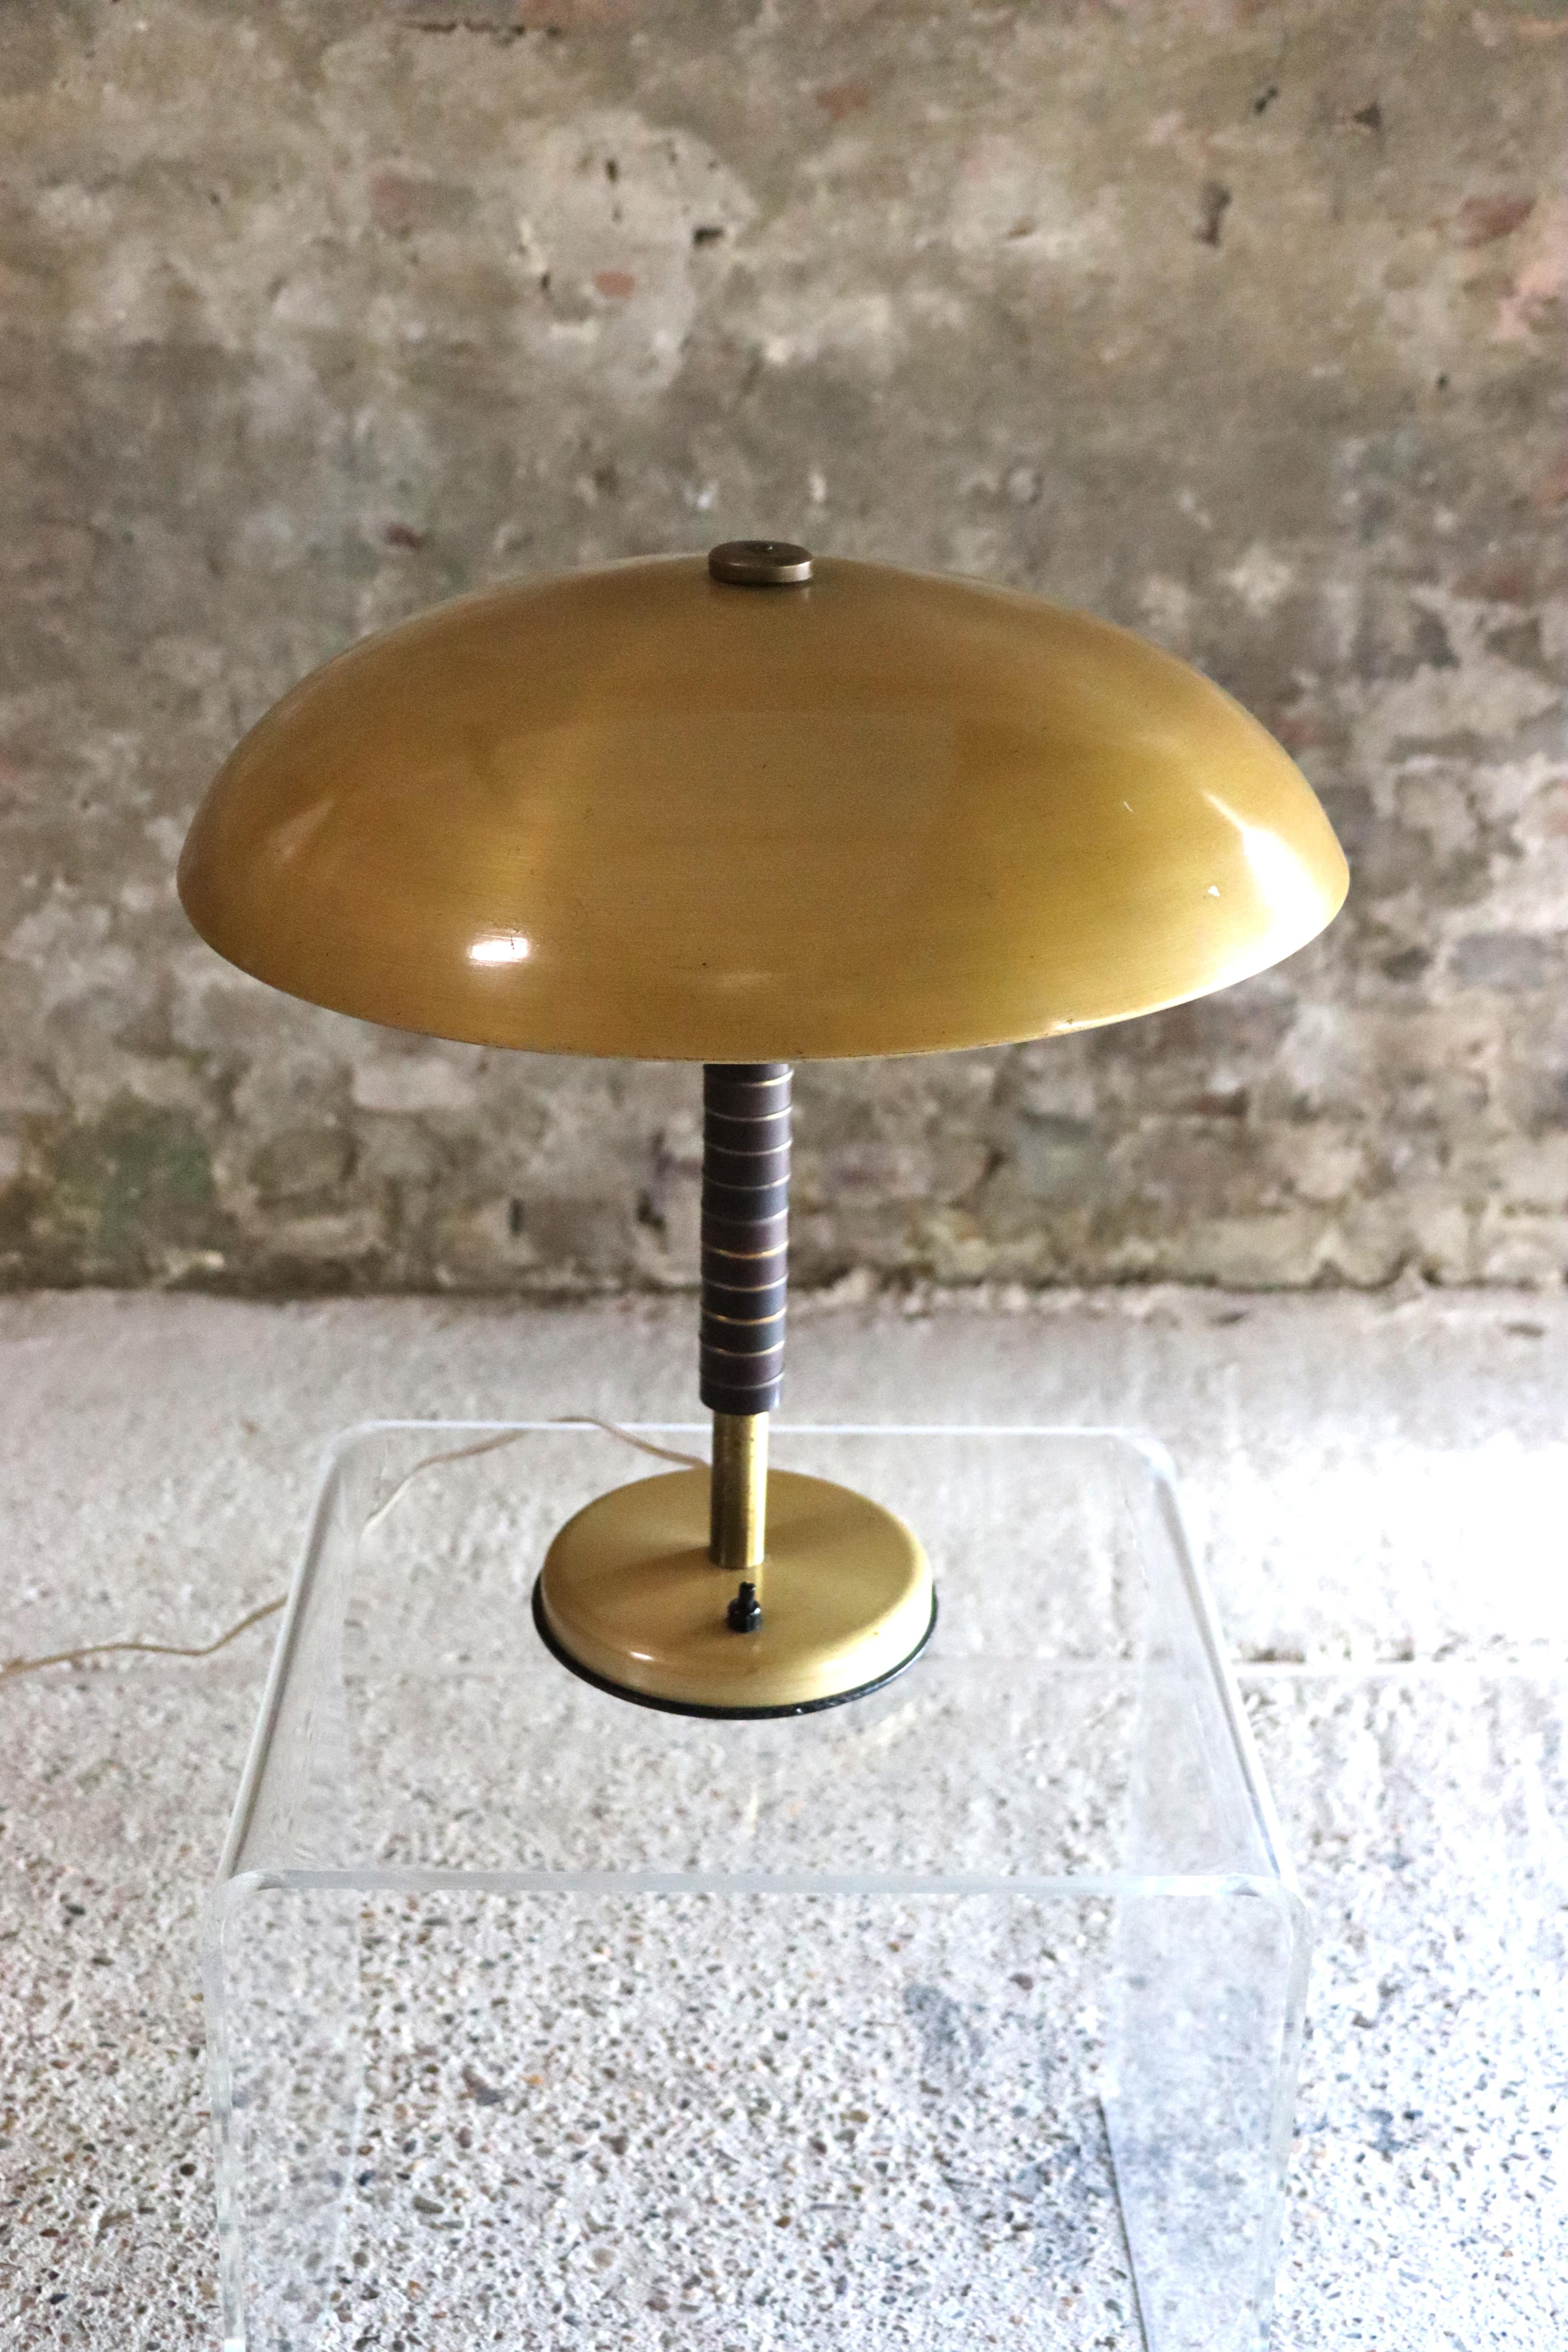 This cool table lamp dates back to 1944 and has a brass base and bakelite stem. The lampshade is aluminum teinted in brass color. The diffusion of the light is magnified by the aluminium that amplifies and reflects it smoothly. A real quality of